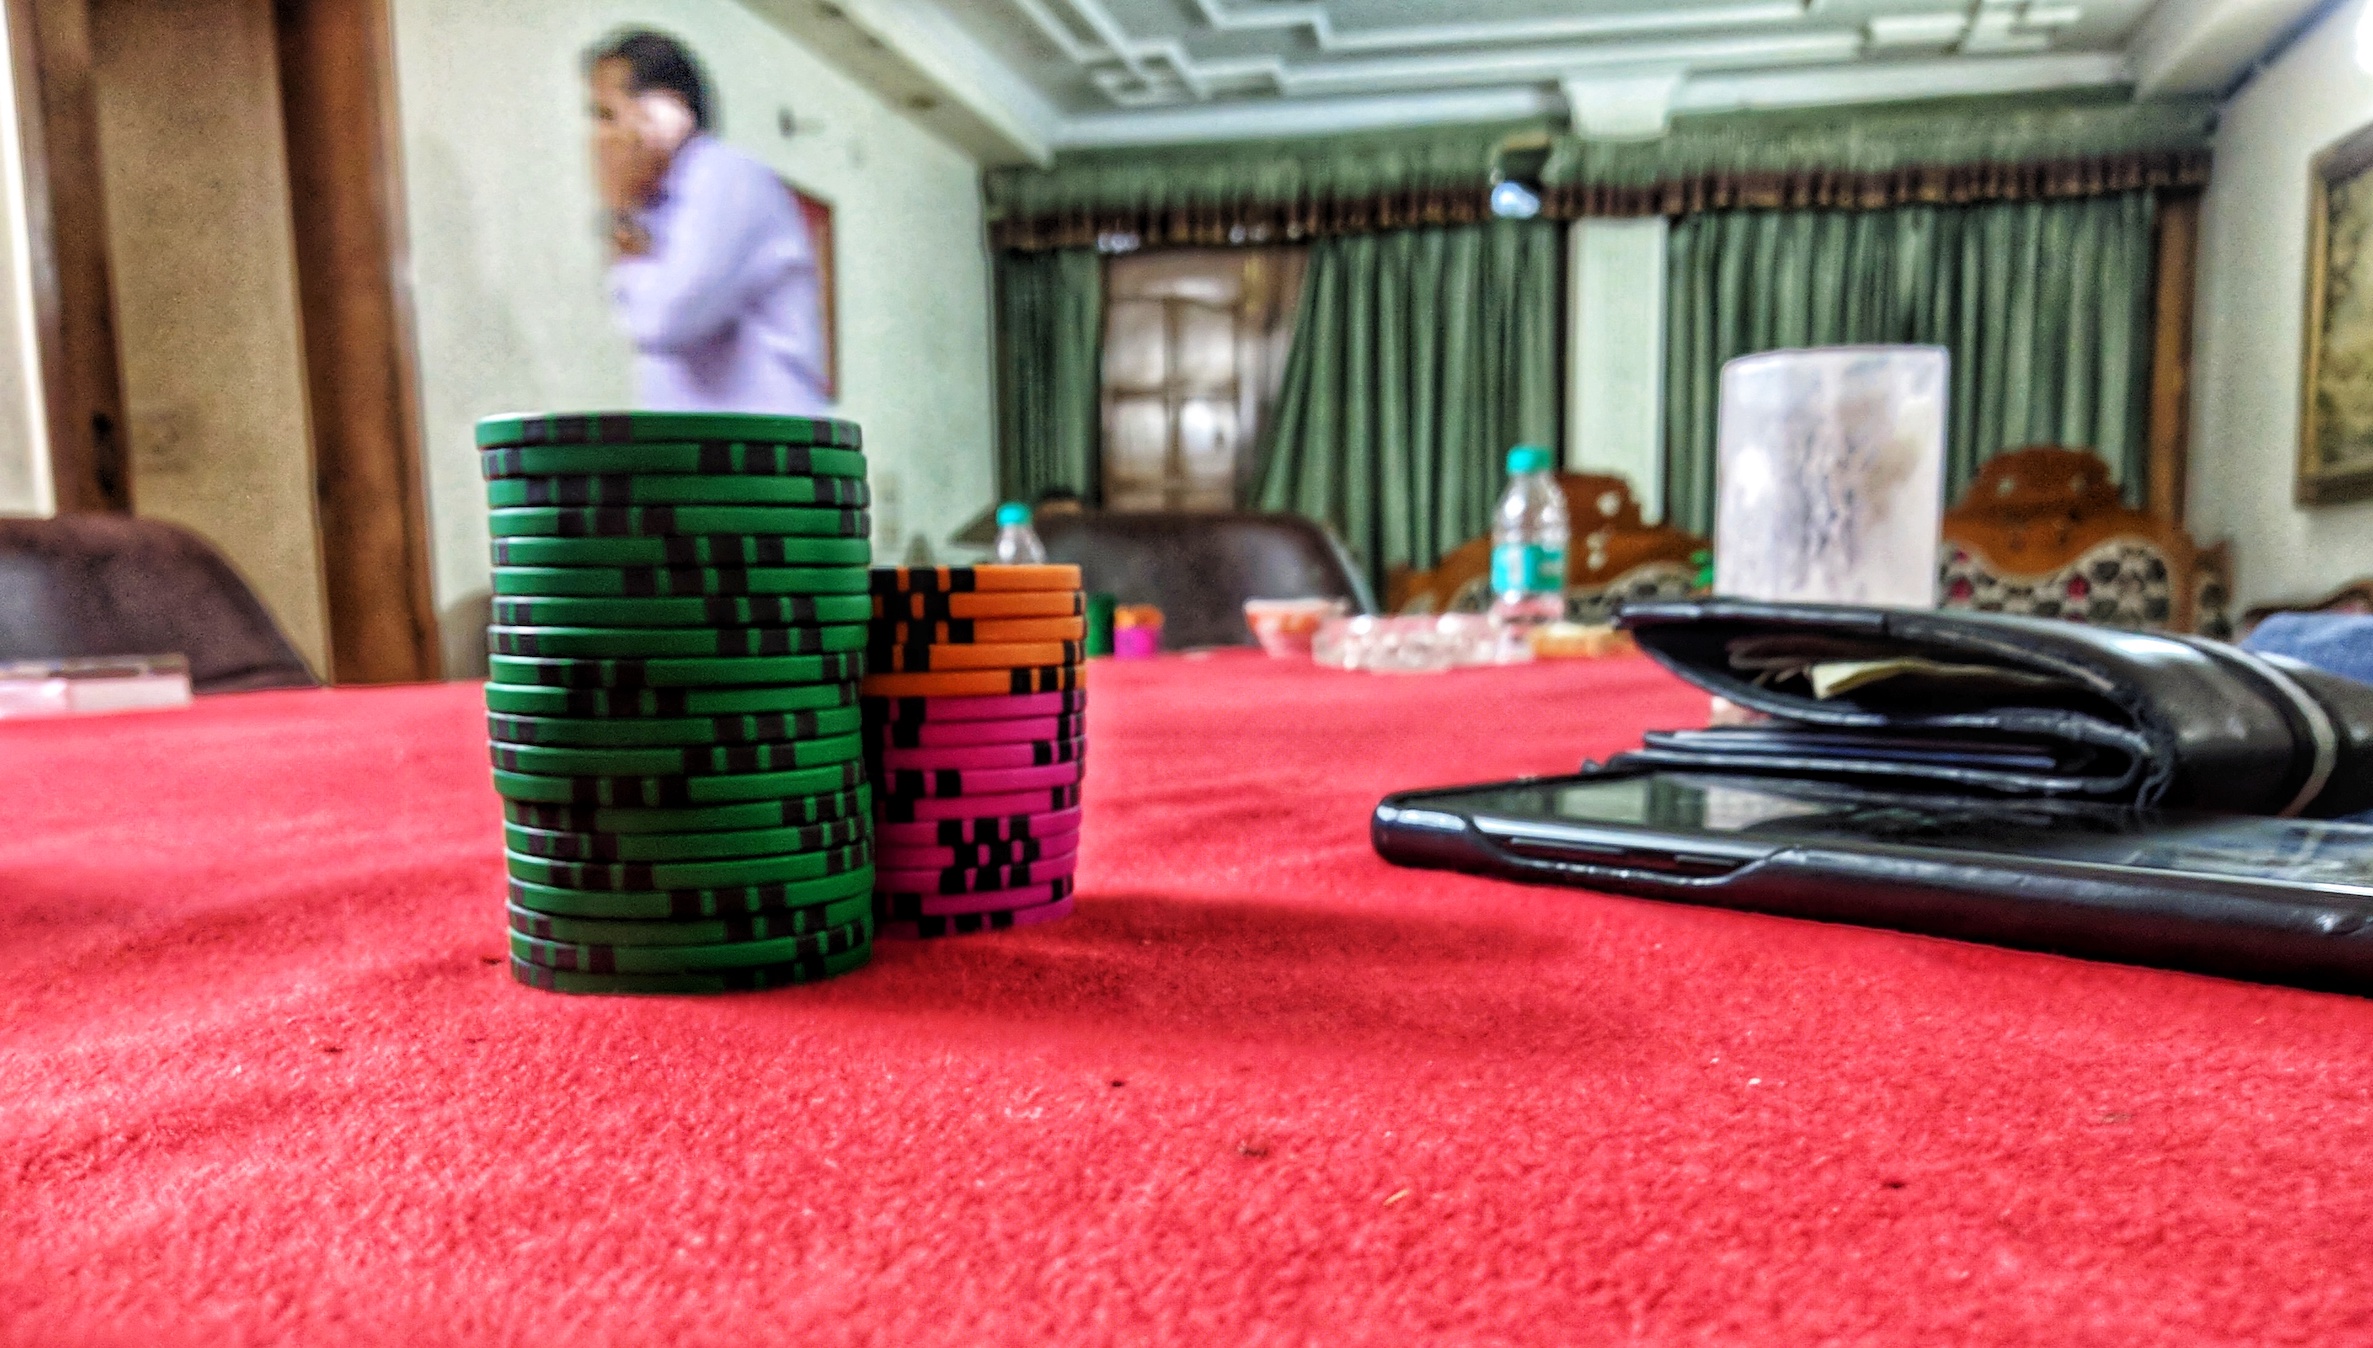 This Illegal Poker Club In Delhi Has 50k Chips And A Pot